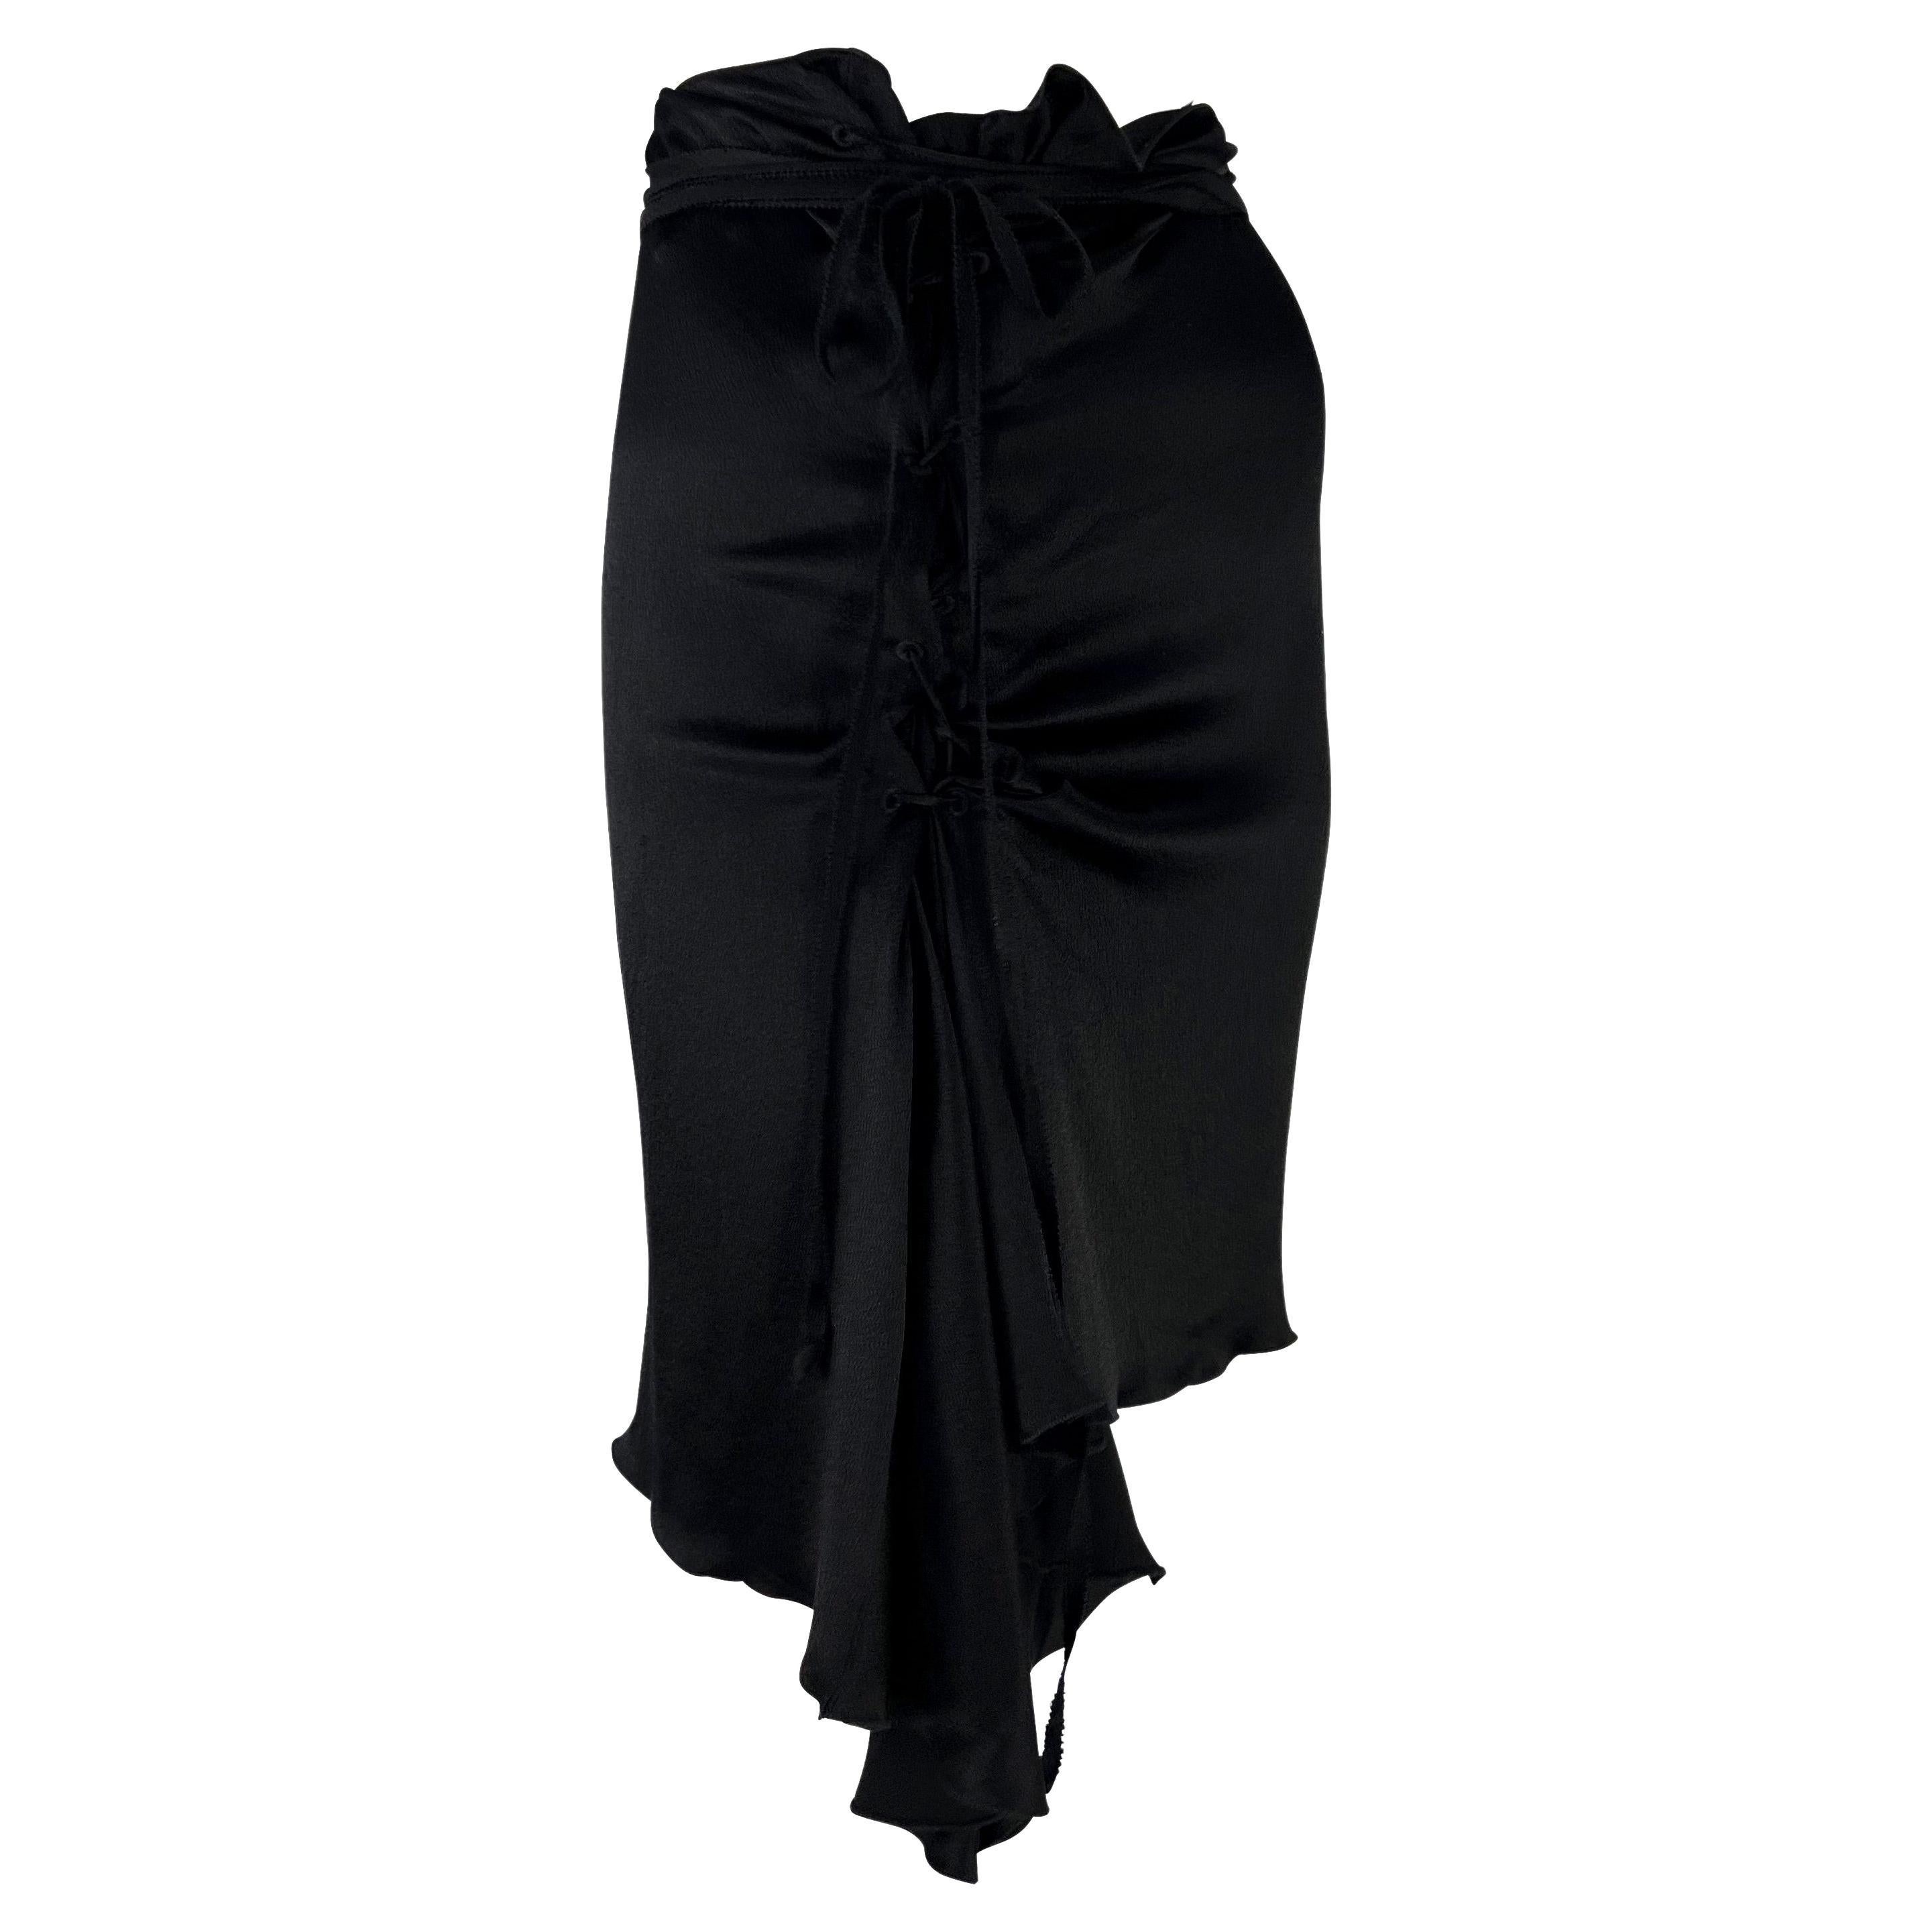 F/W 2002 Gucci by Tom Ford Lace-Up Black Crepe Silk Asymmetric Skirt 2